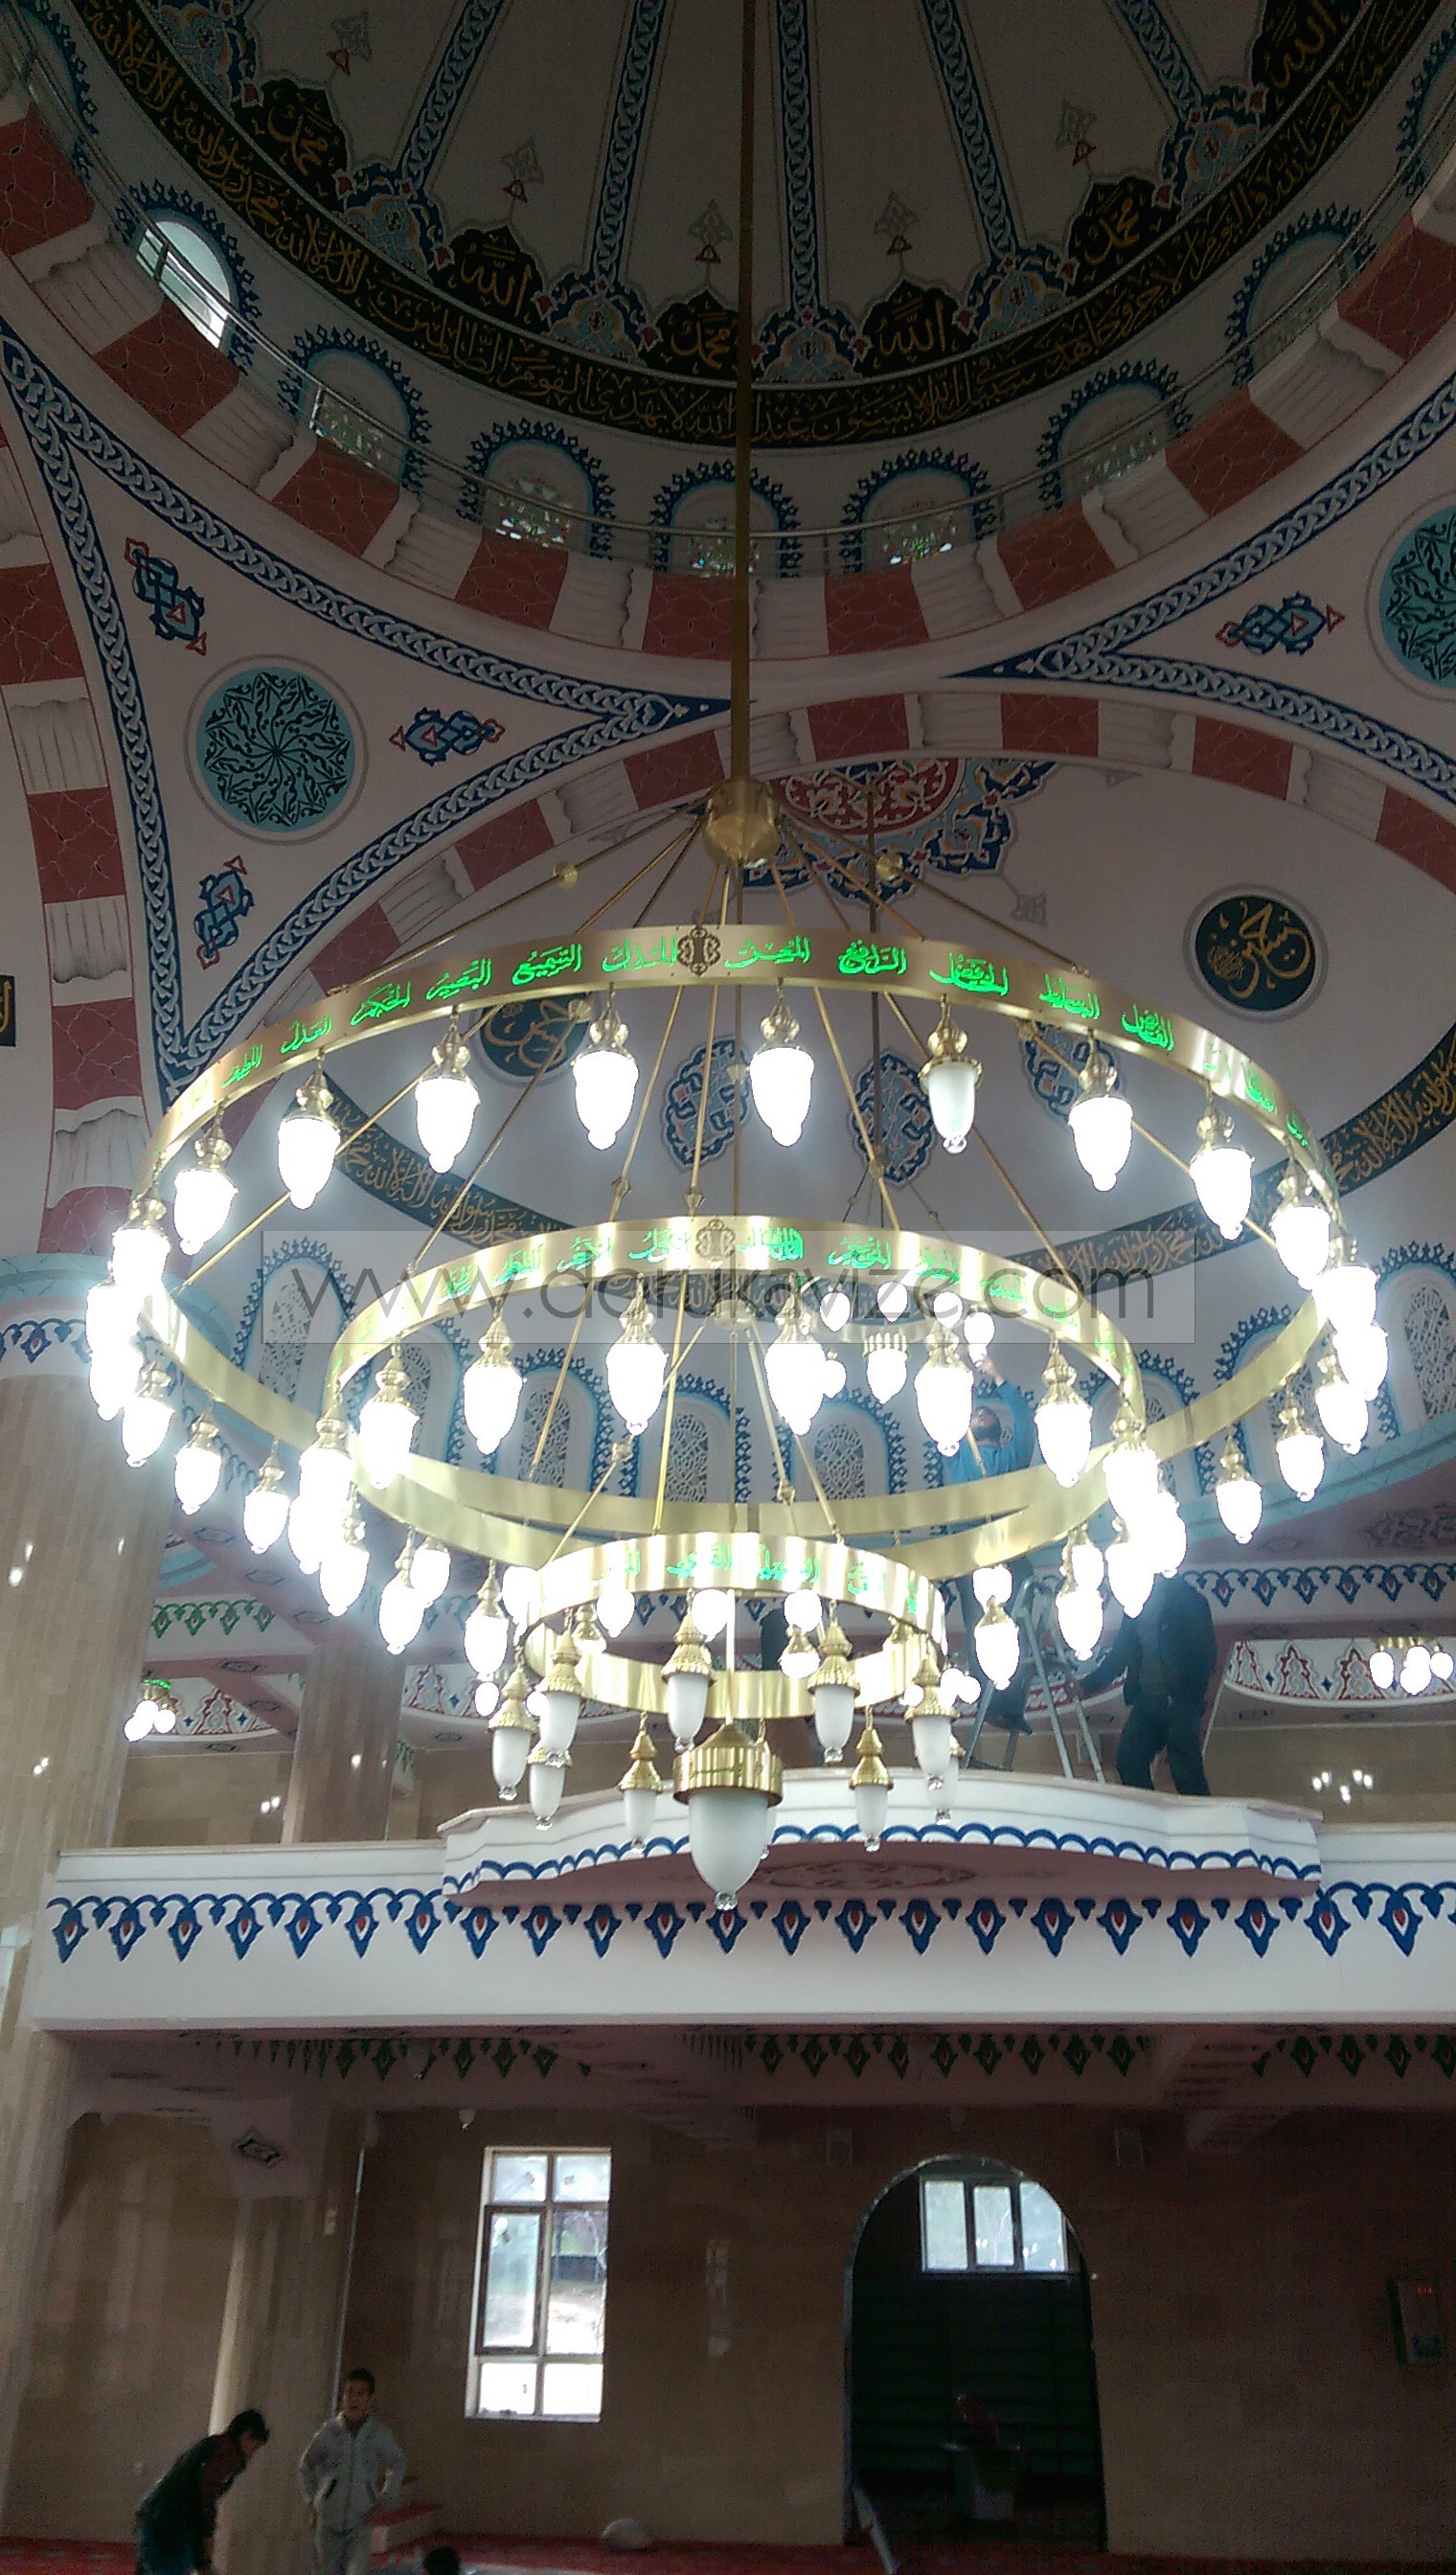 200%20square%20(diameter)%2031%20bulbs%20under%20the%20main%20dome%20led%20mosque%20chandelier%203%20tiers